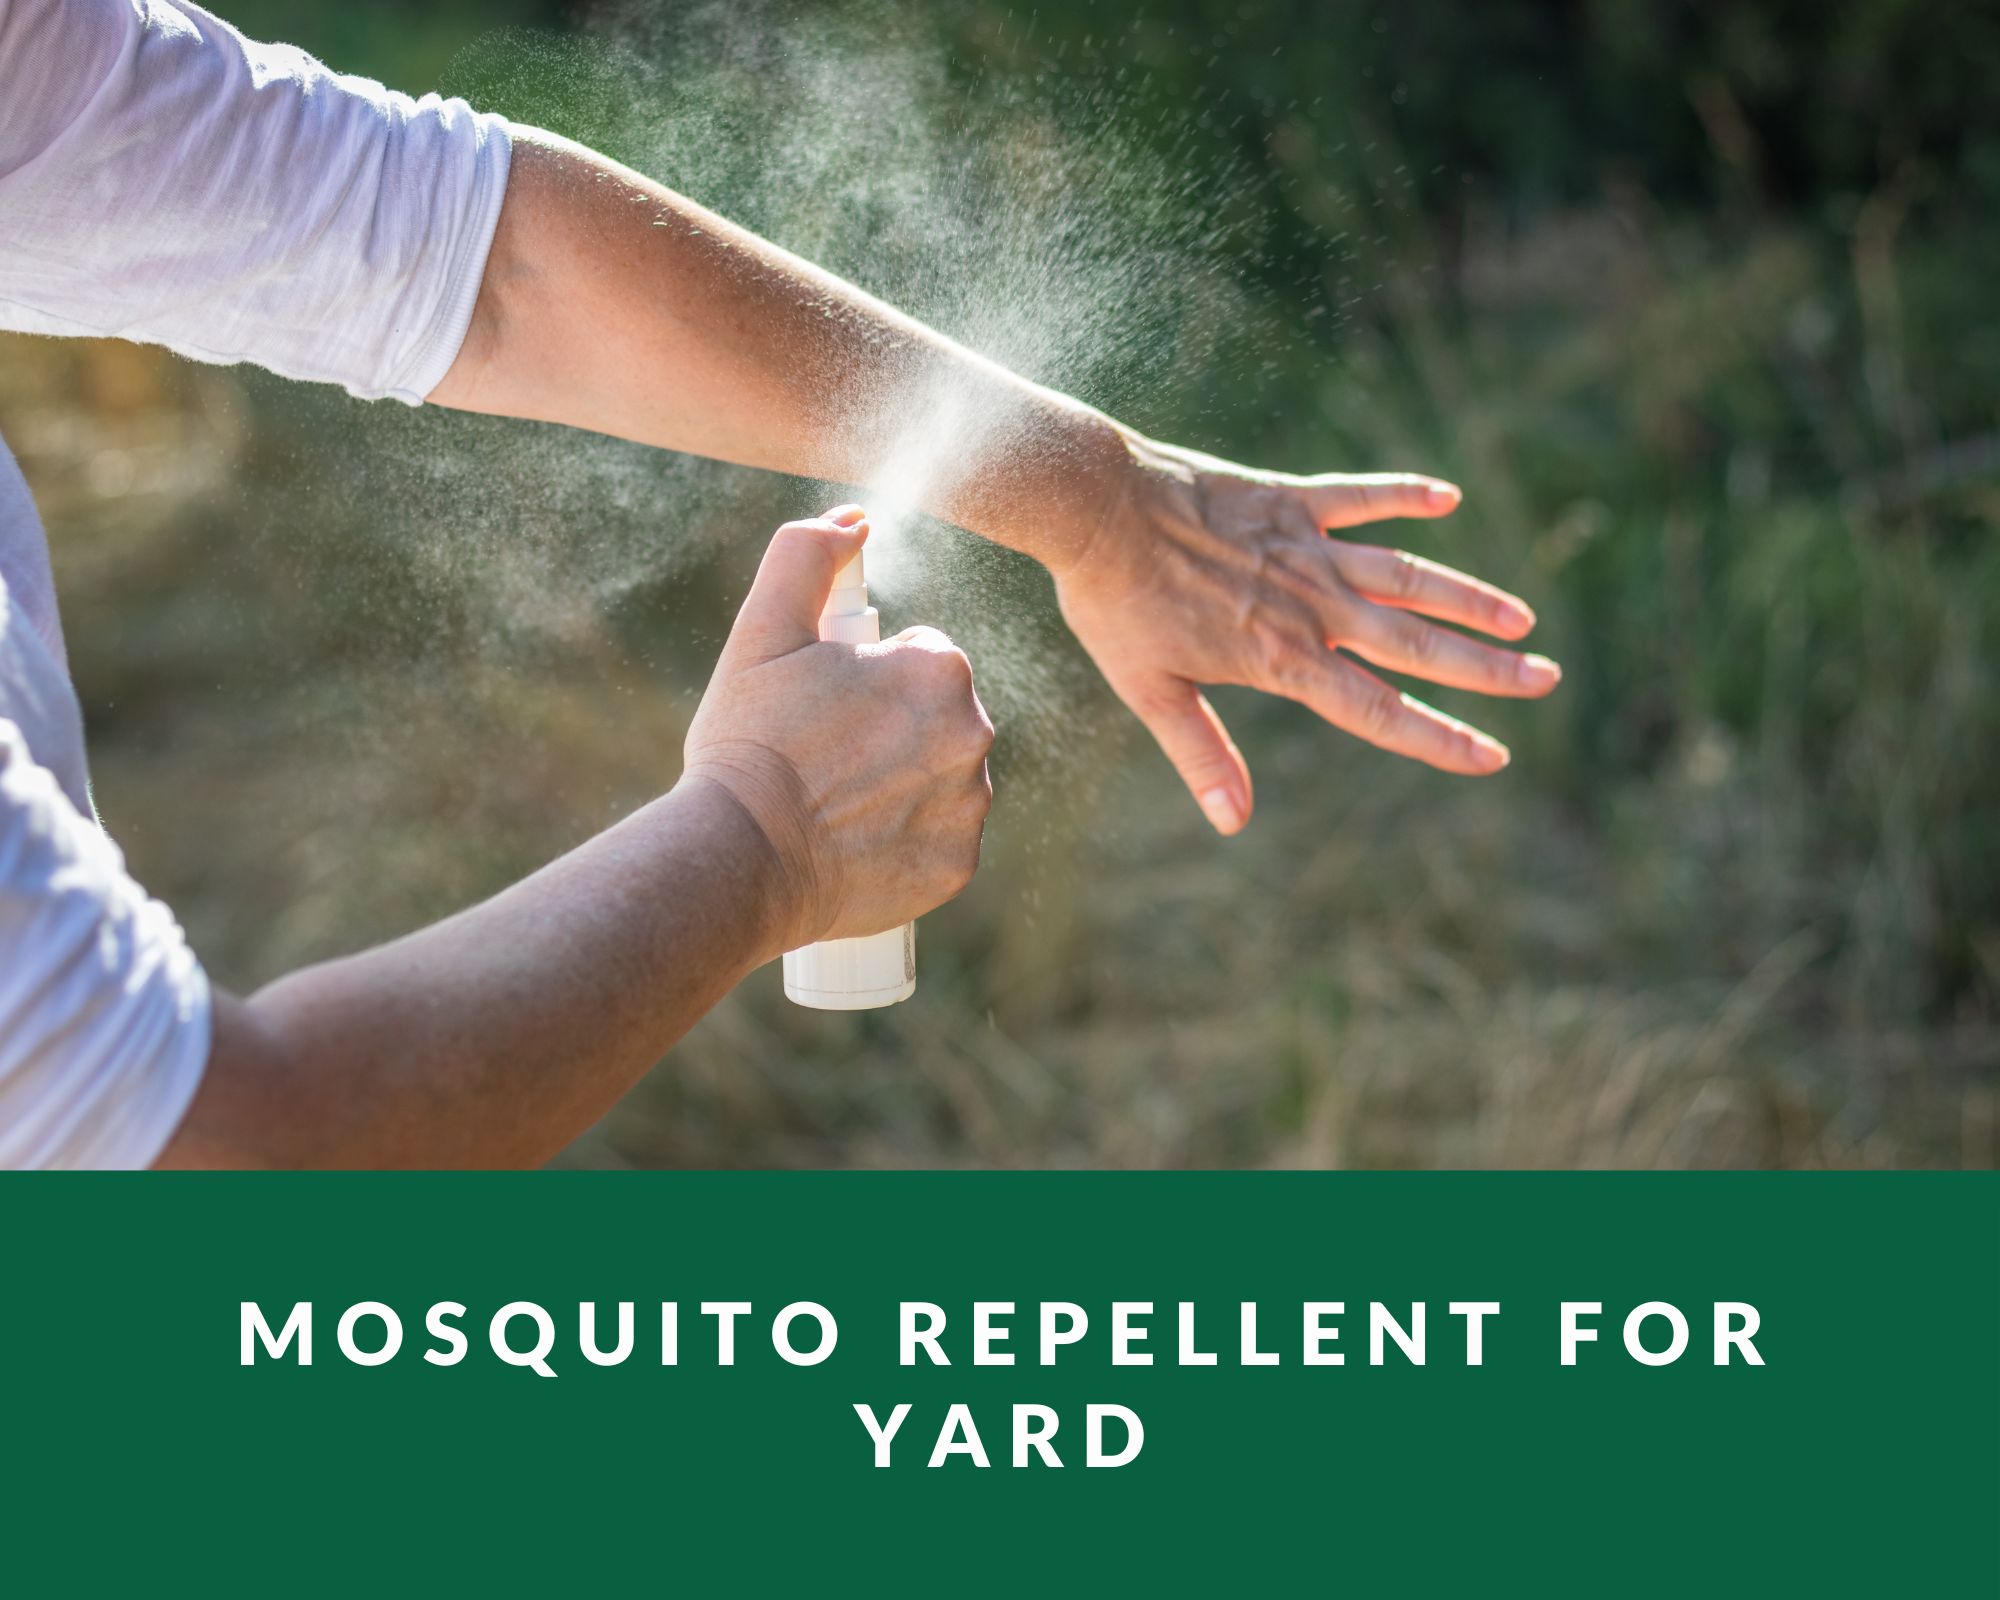 man spraying mosquito repellent for yard